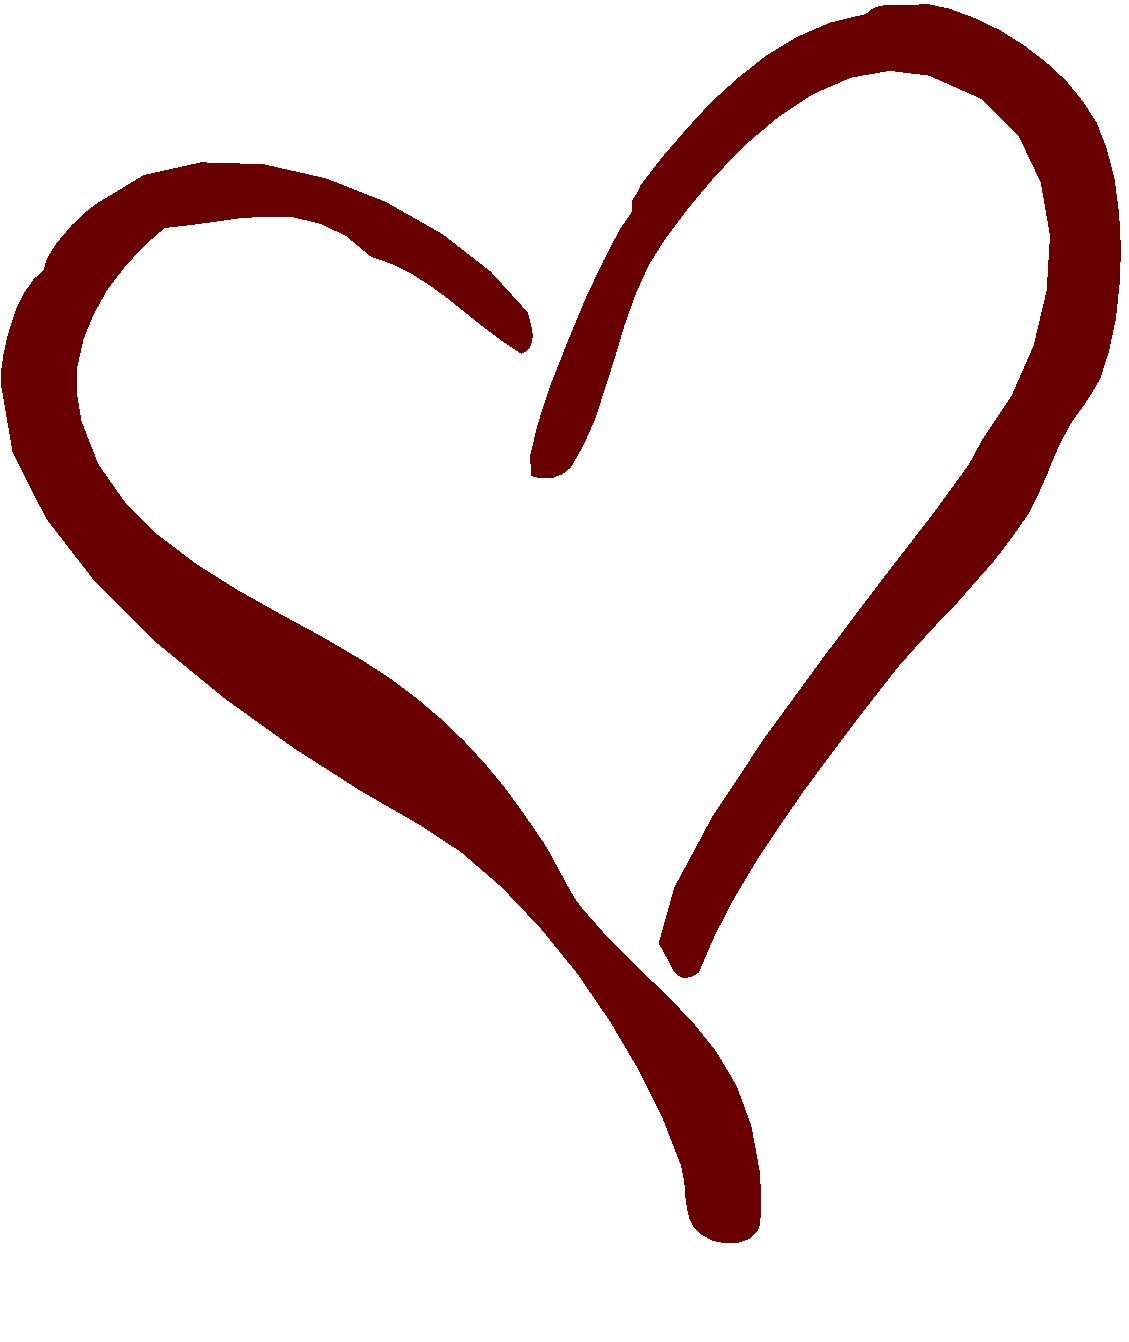 Clipart Heart Outline | Clipart Panda - Free Clipart Images